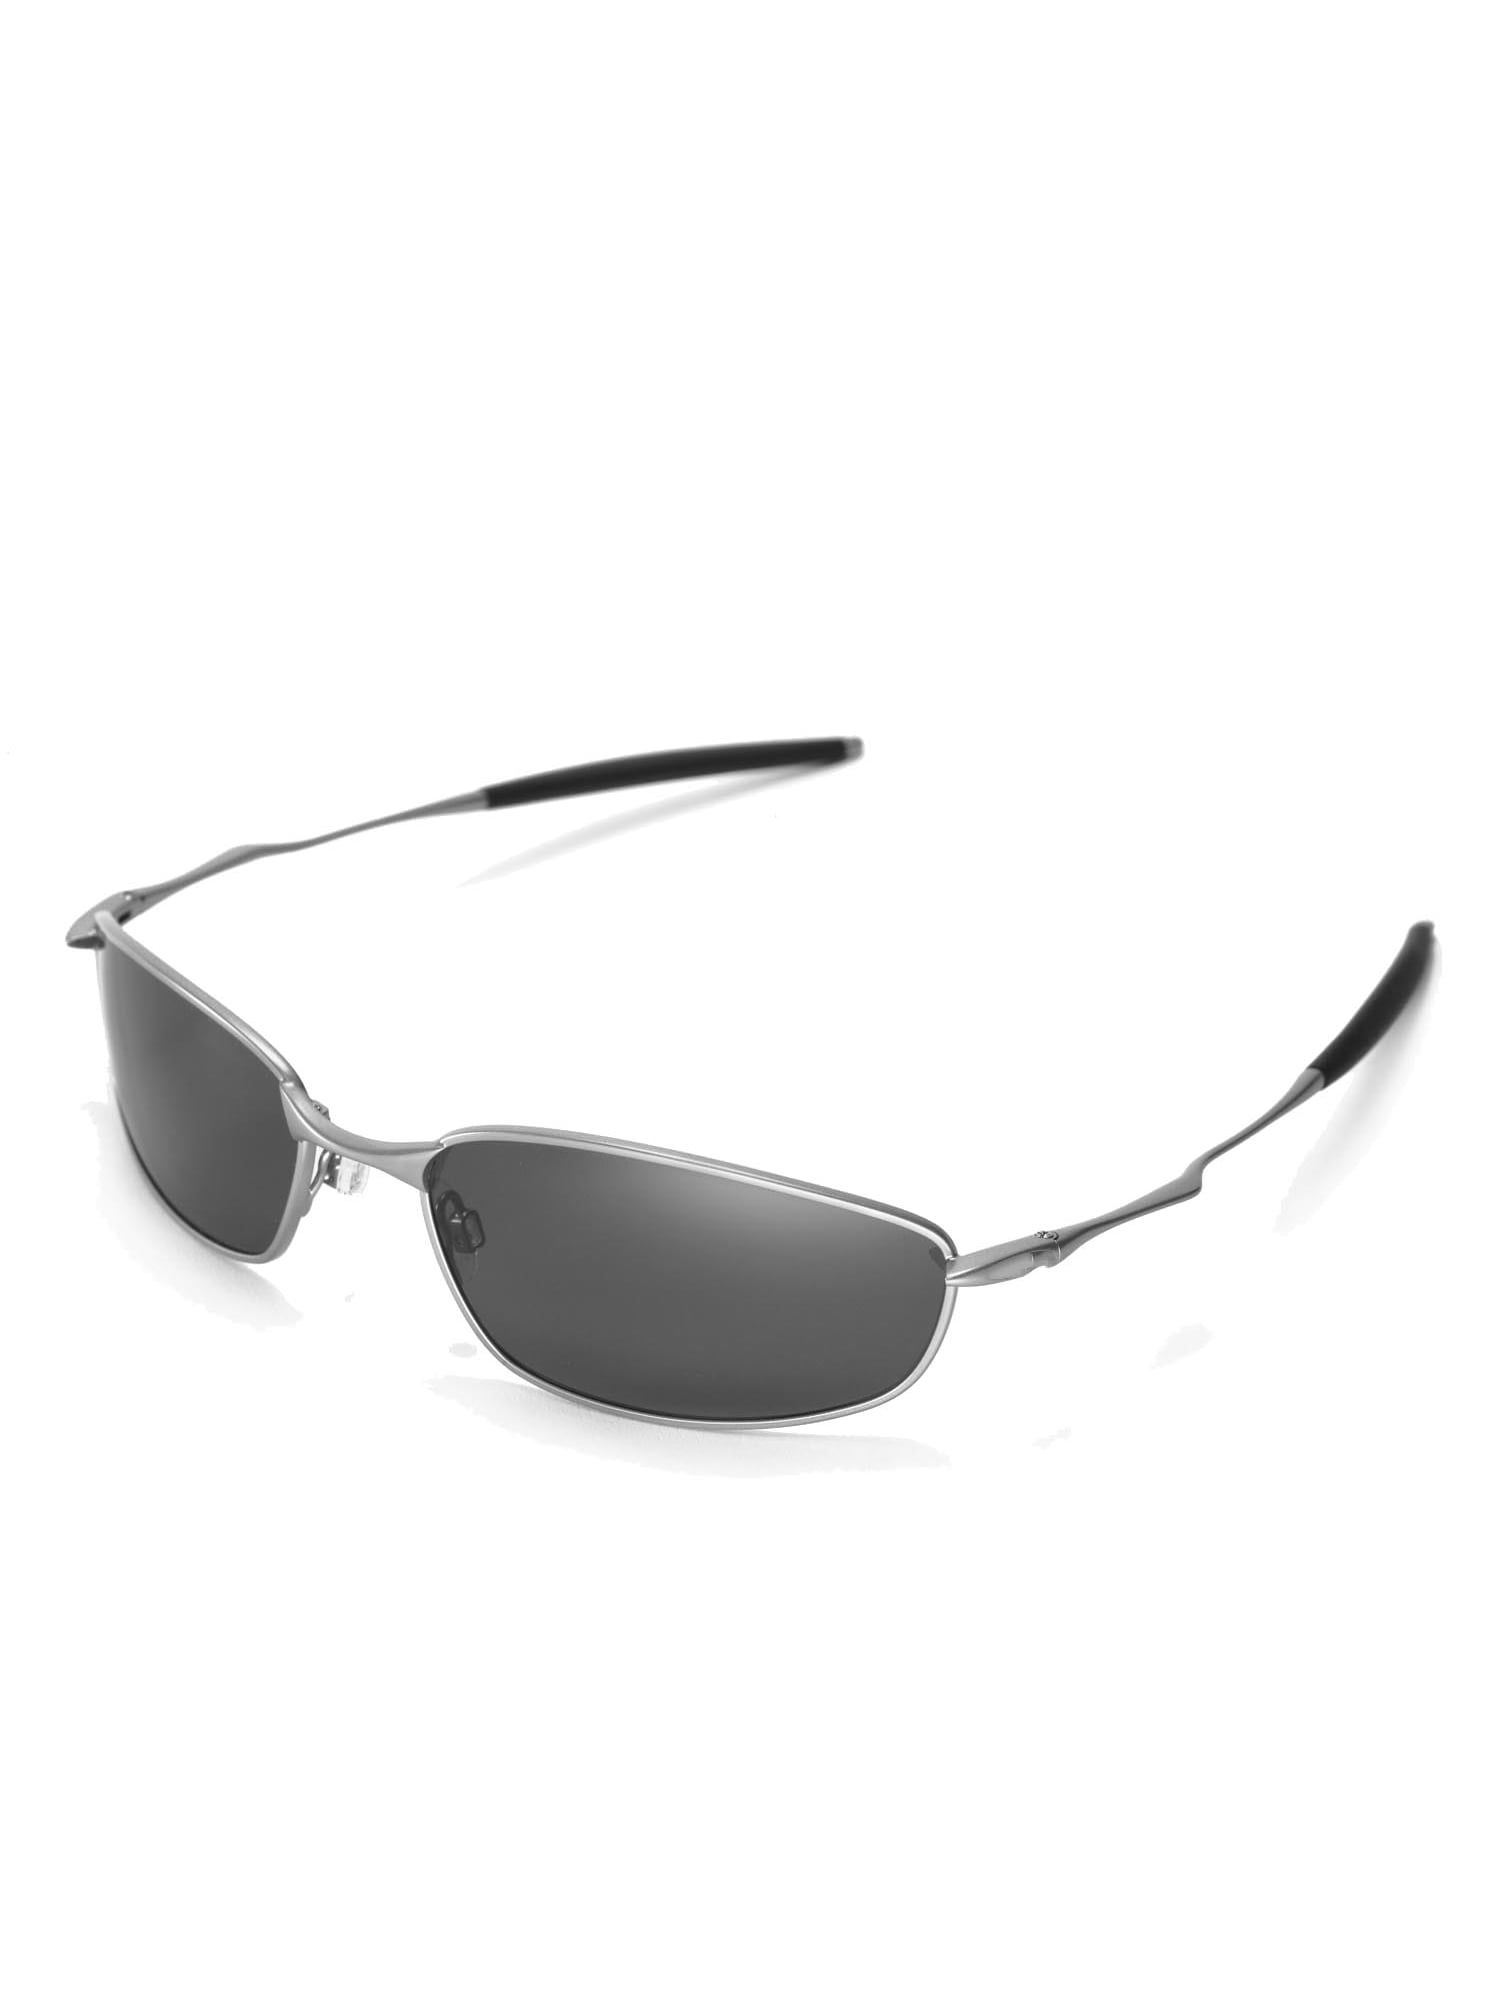 Walleva Polarized Replacement Lenses for Oakley Sunglasses -